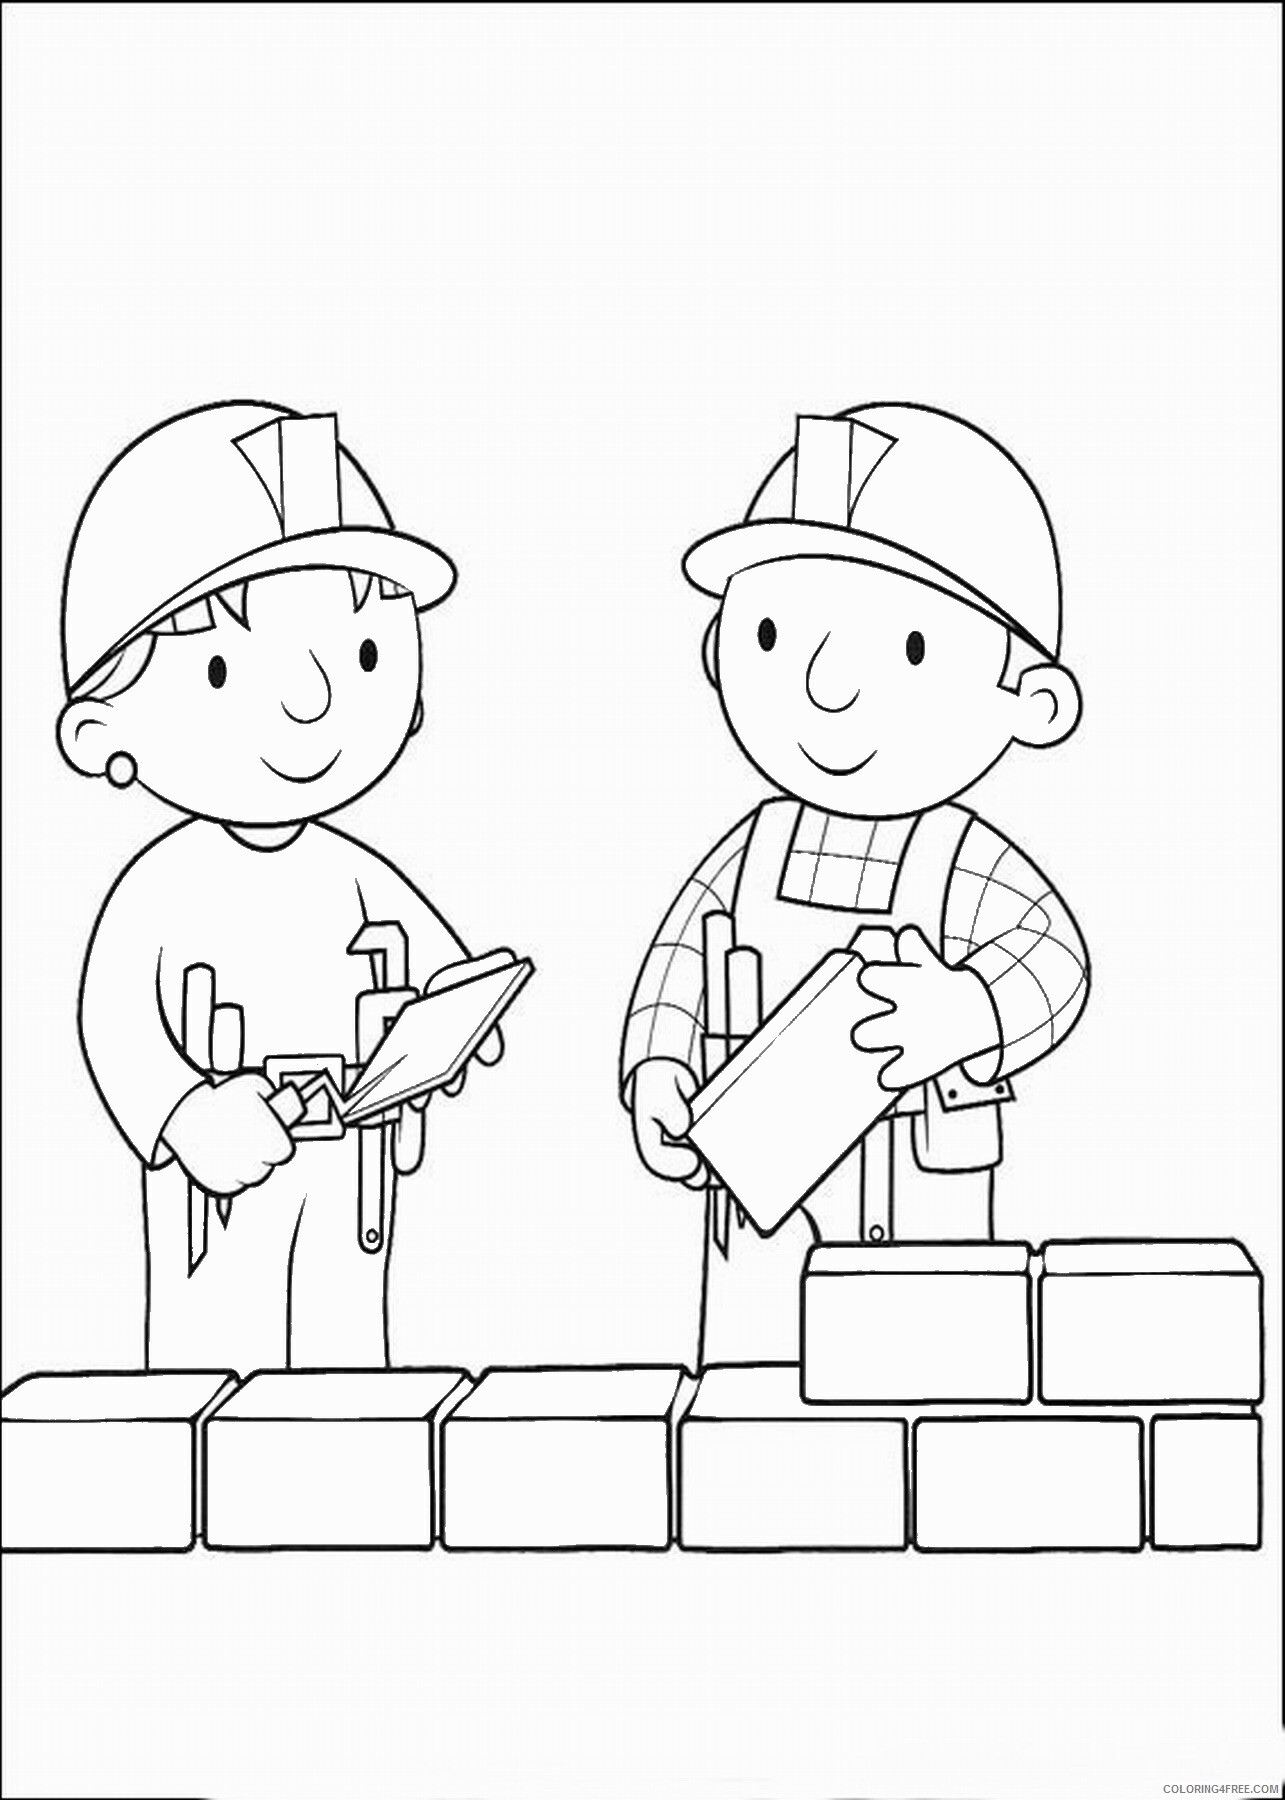 Bob the Builder Coloring Pages TV Film bob the builder_22 Printable 2020 00972 Coloring4free